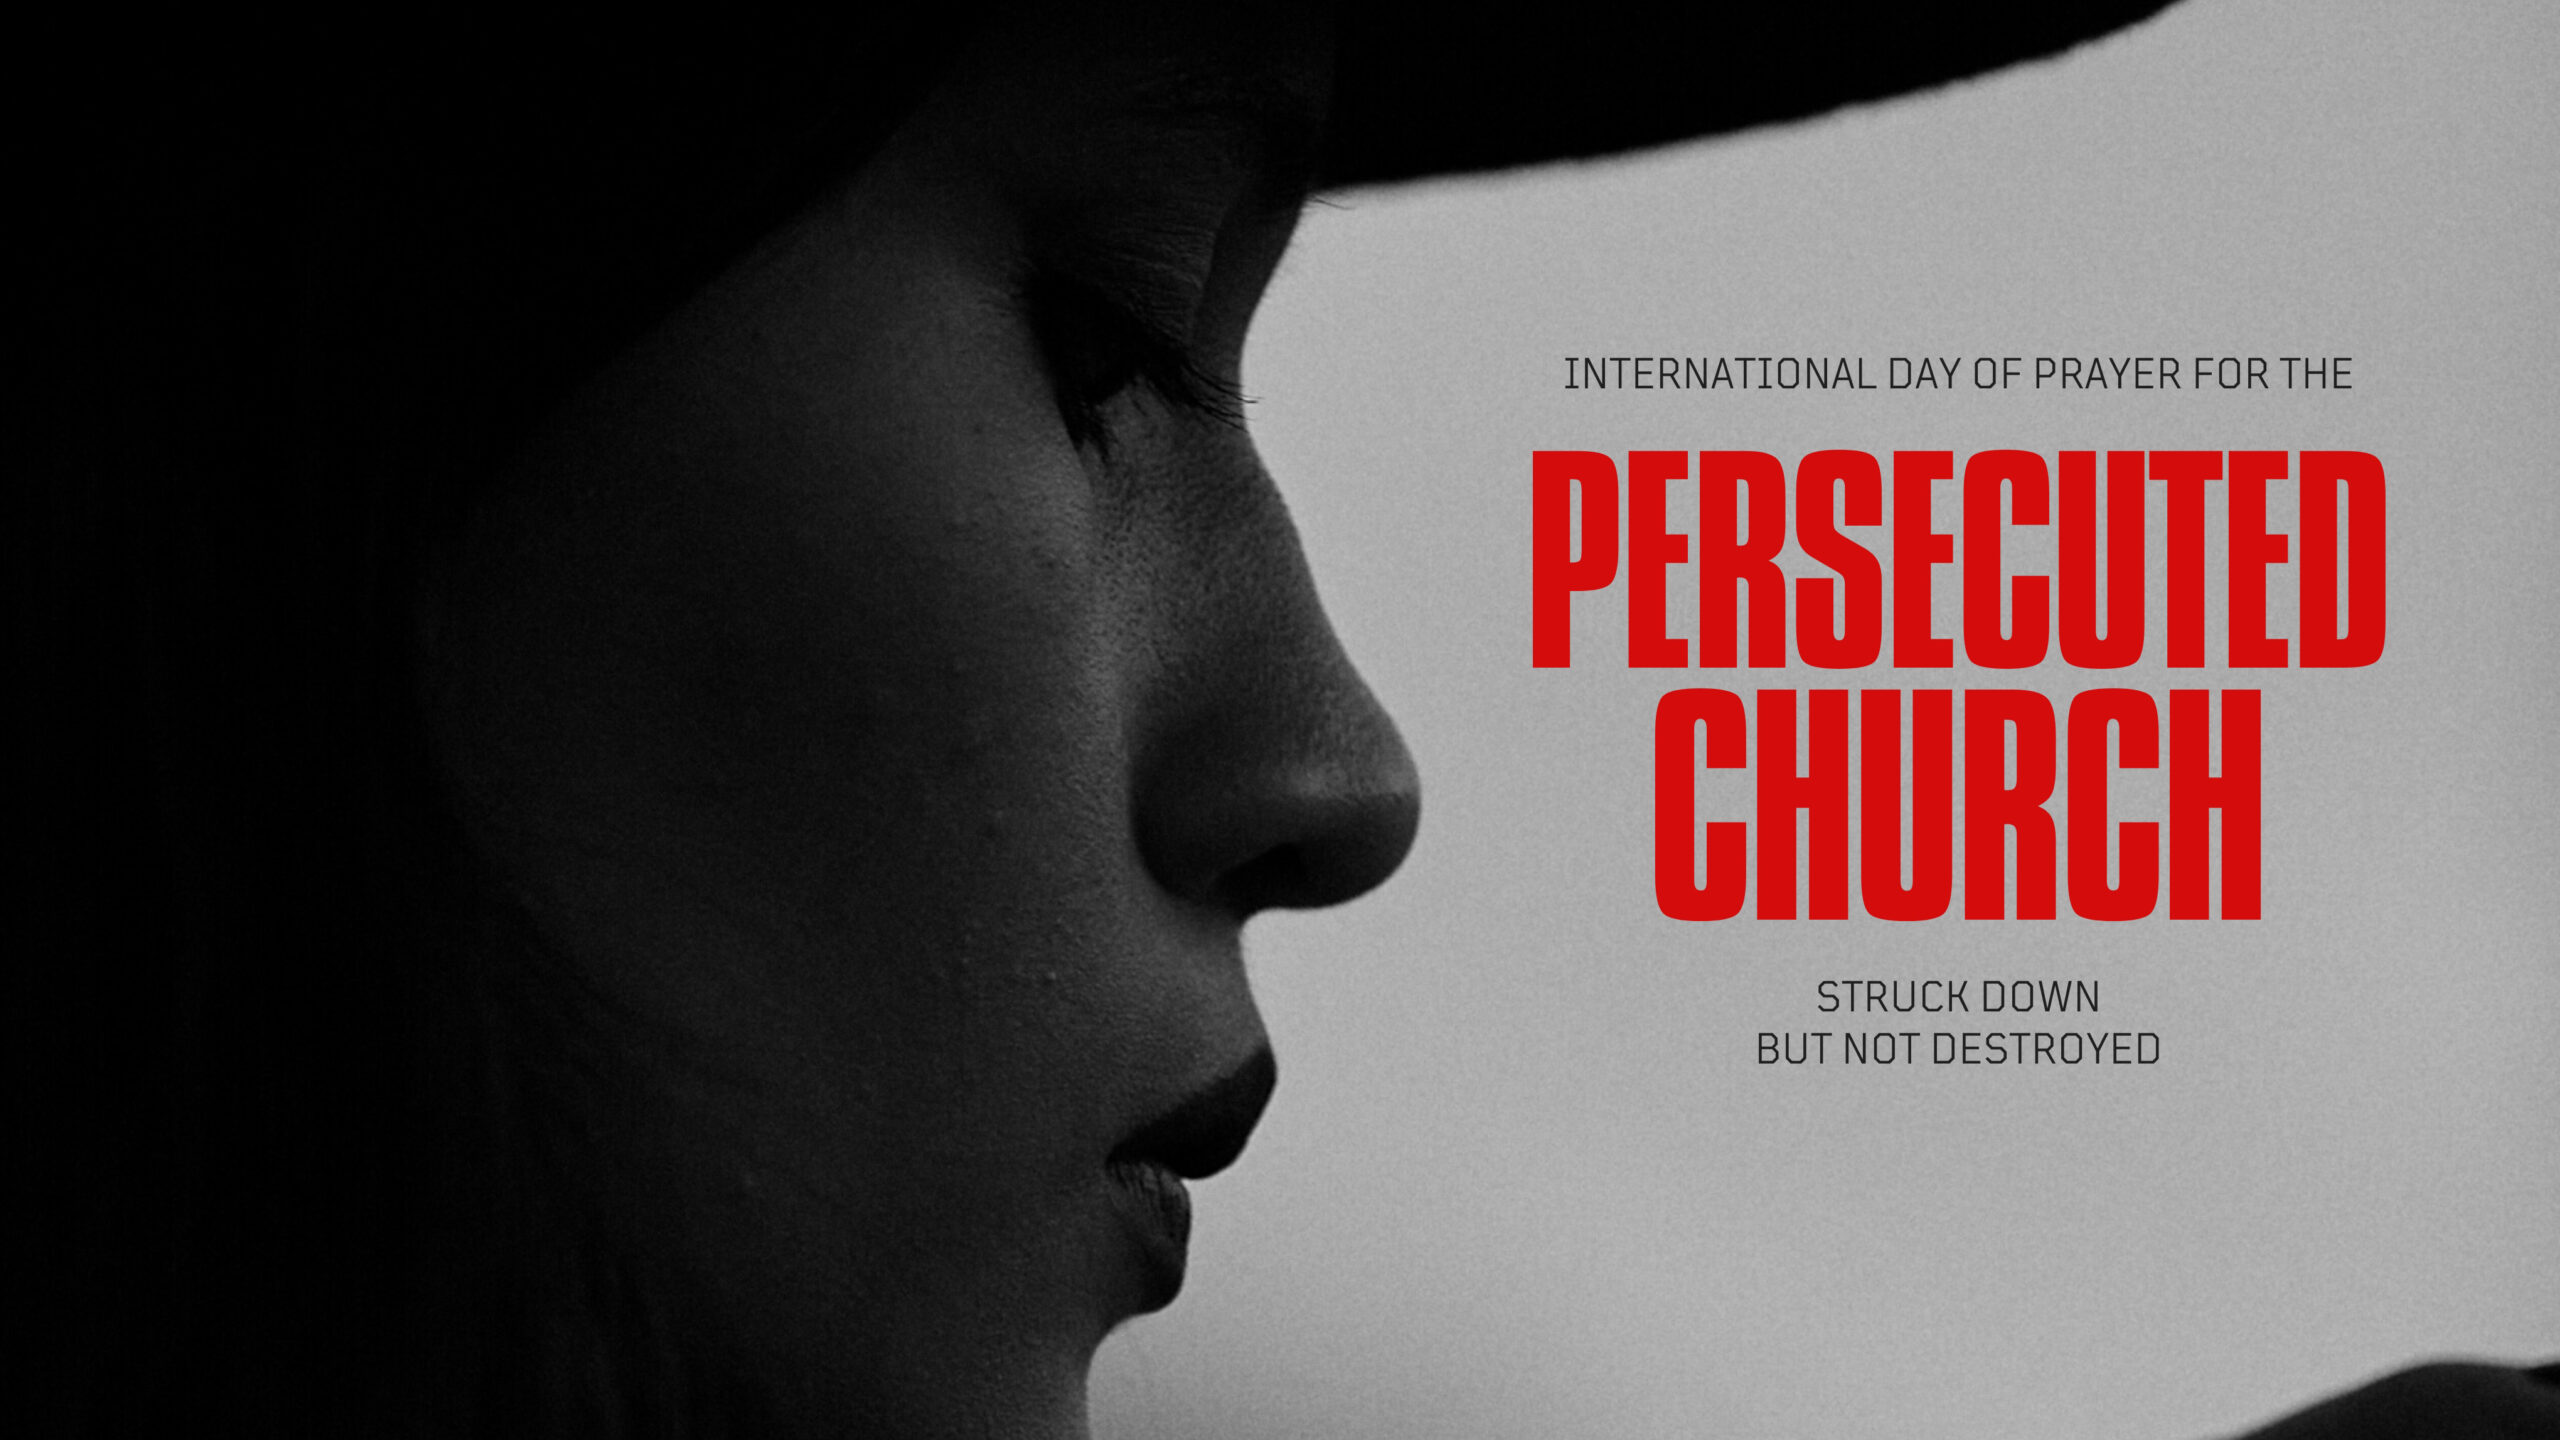 Persecuted Church (Struck Down But Not Destroyed)